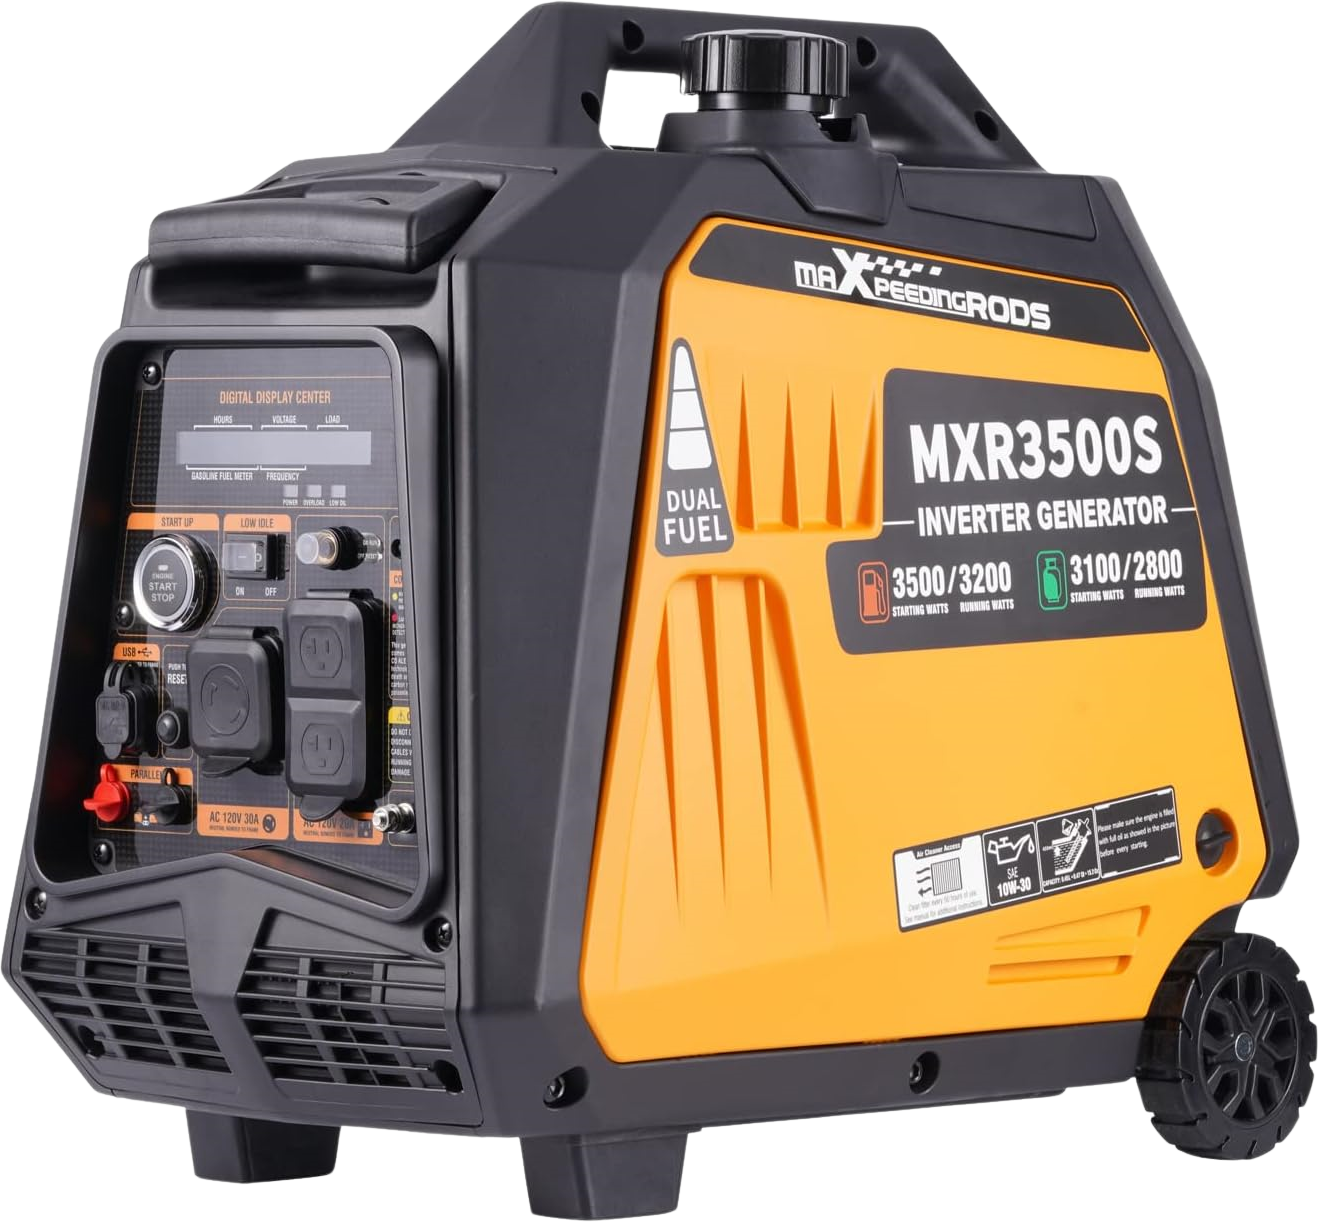 Maxpeedingrods, Maxpeedingrods MXR3500-DC-US Dual Fuel Inverter Generator 3200W/3500W RV and Parallel Ready with CO Alert and Remote Start New